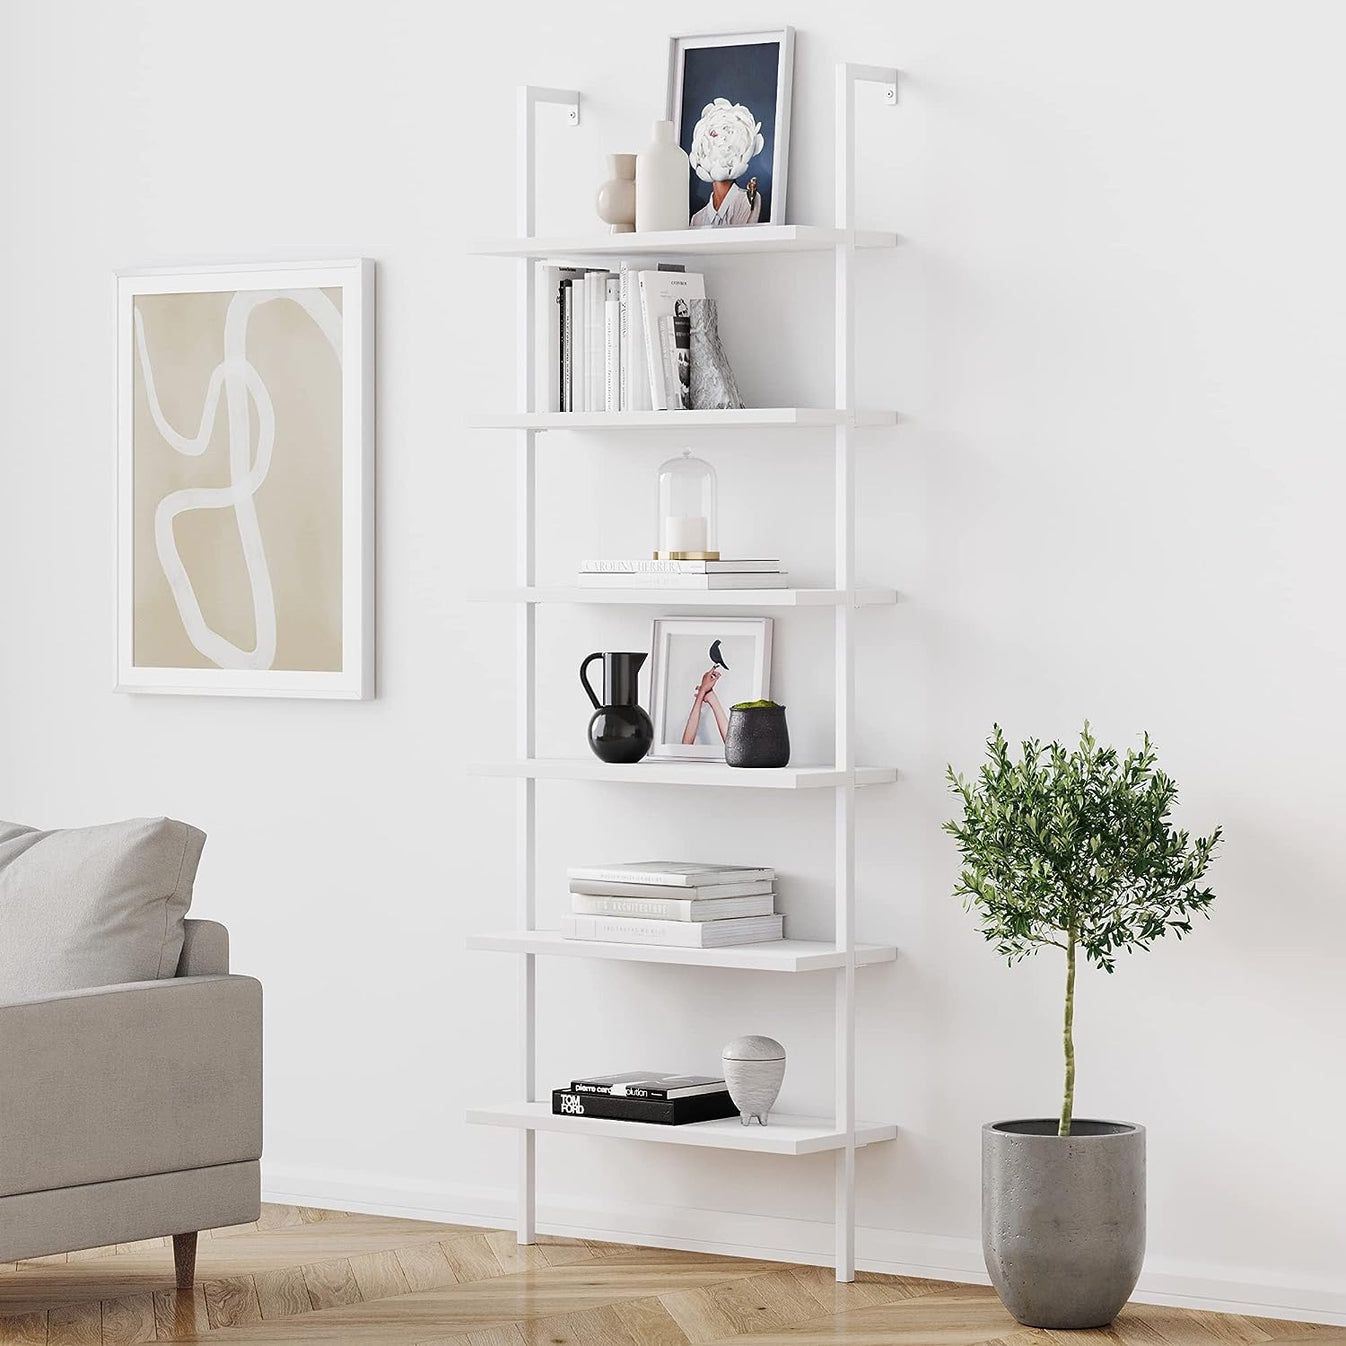 NEW - Nathan James Theo 6-Shelf Tall Modern Bookshelf, Wall Mount Ladder Shelf Bookcase with Wood and Industrial Metal Frame, Matte White - Retail $19